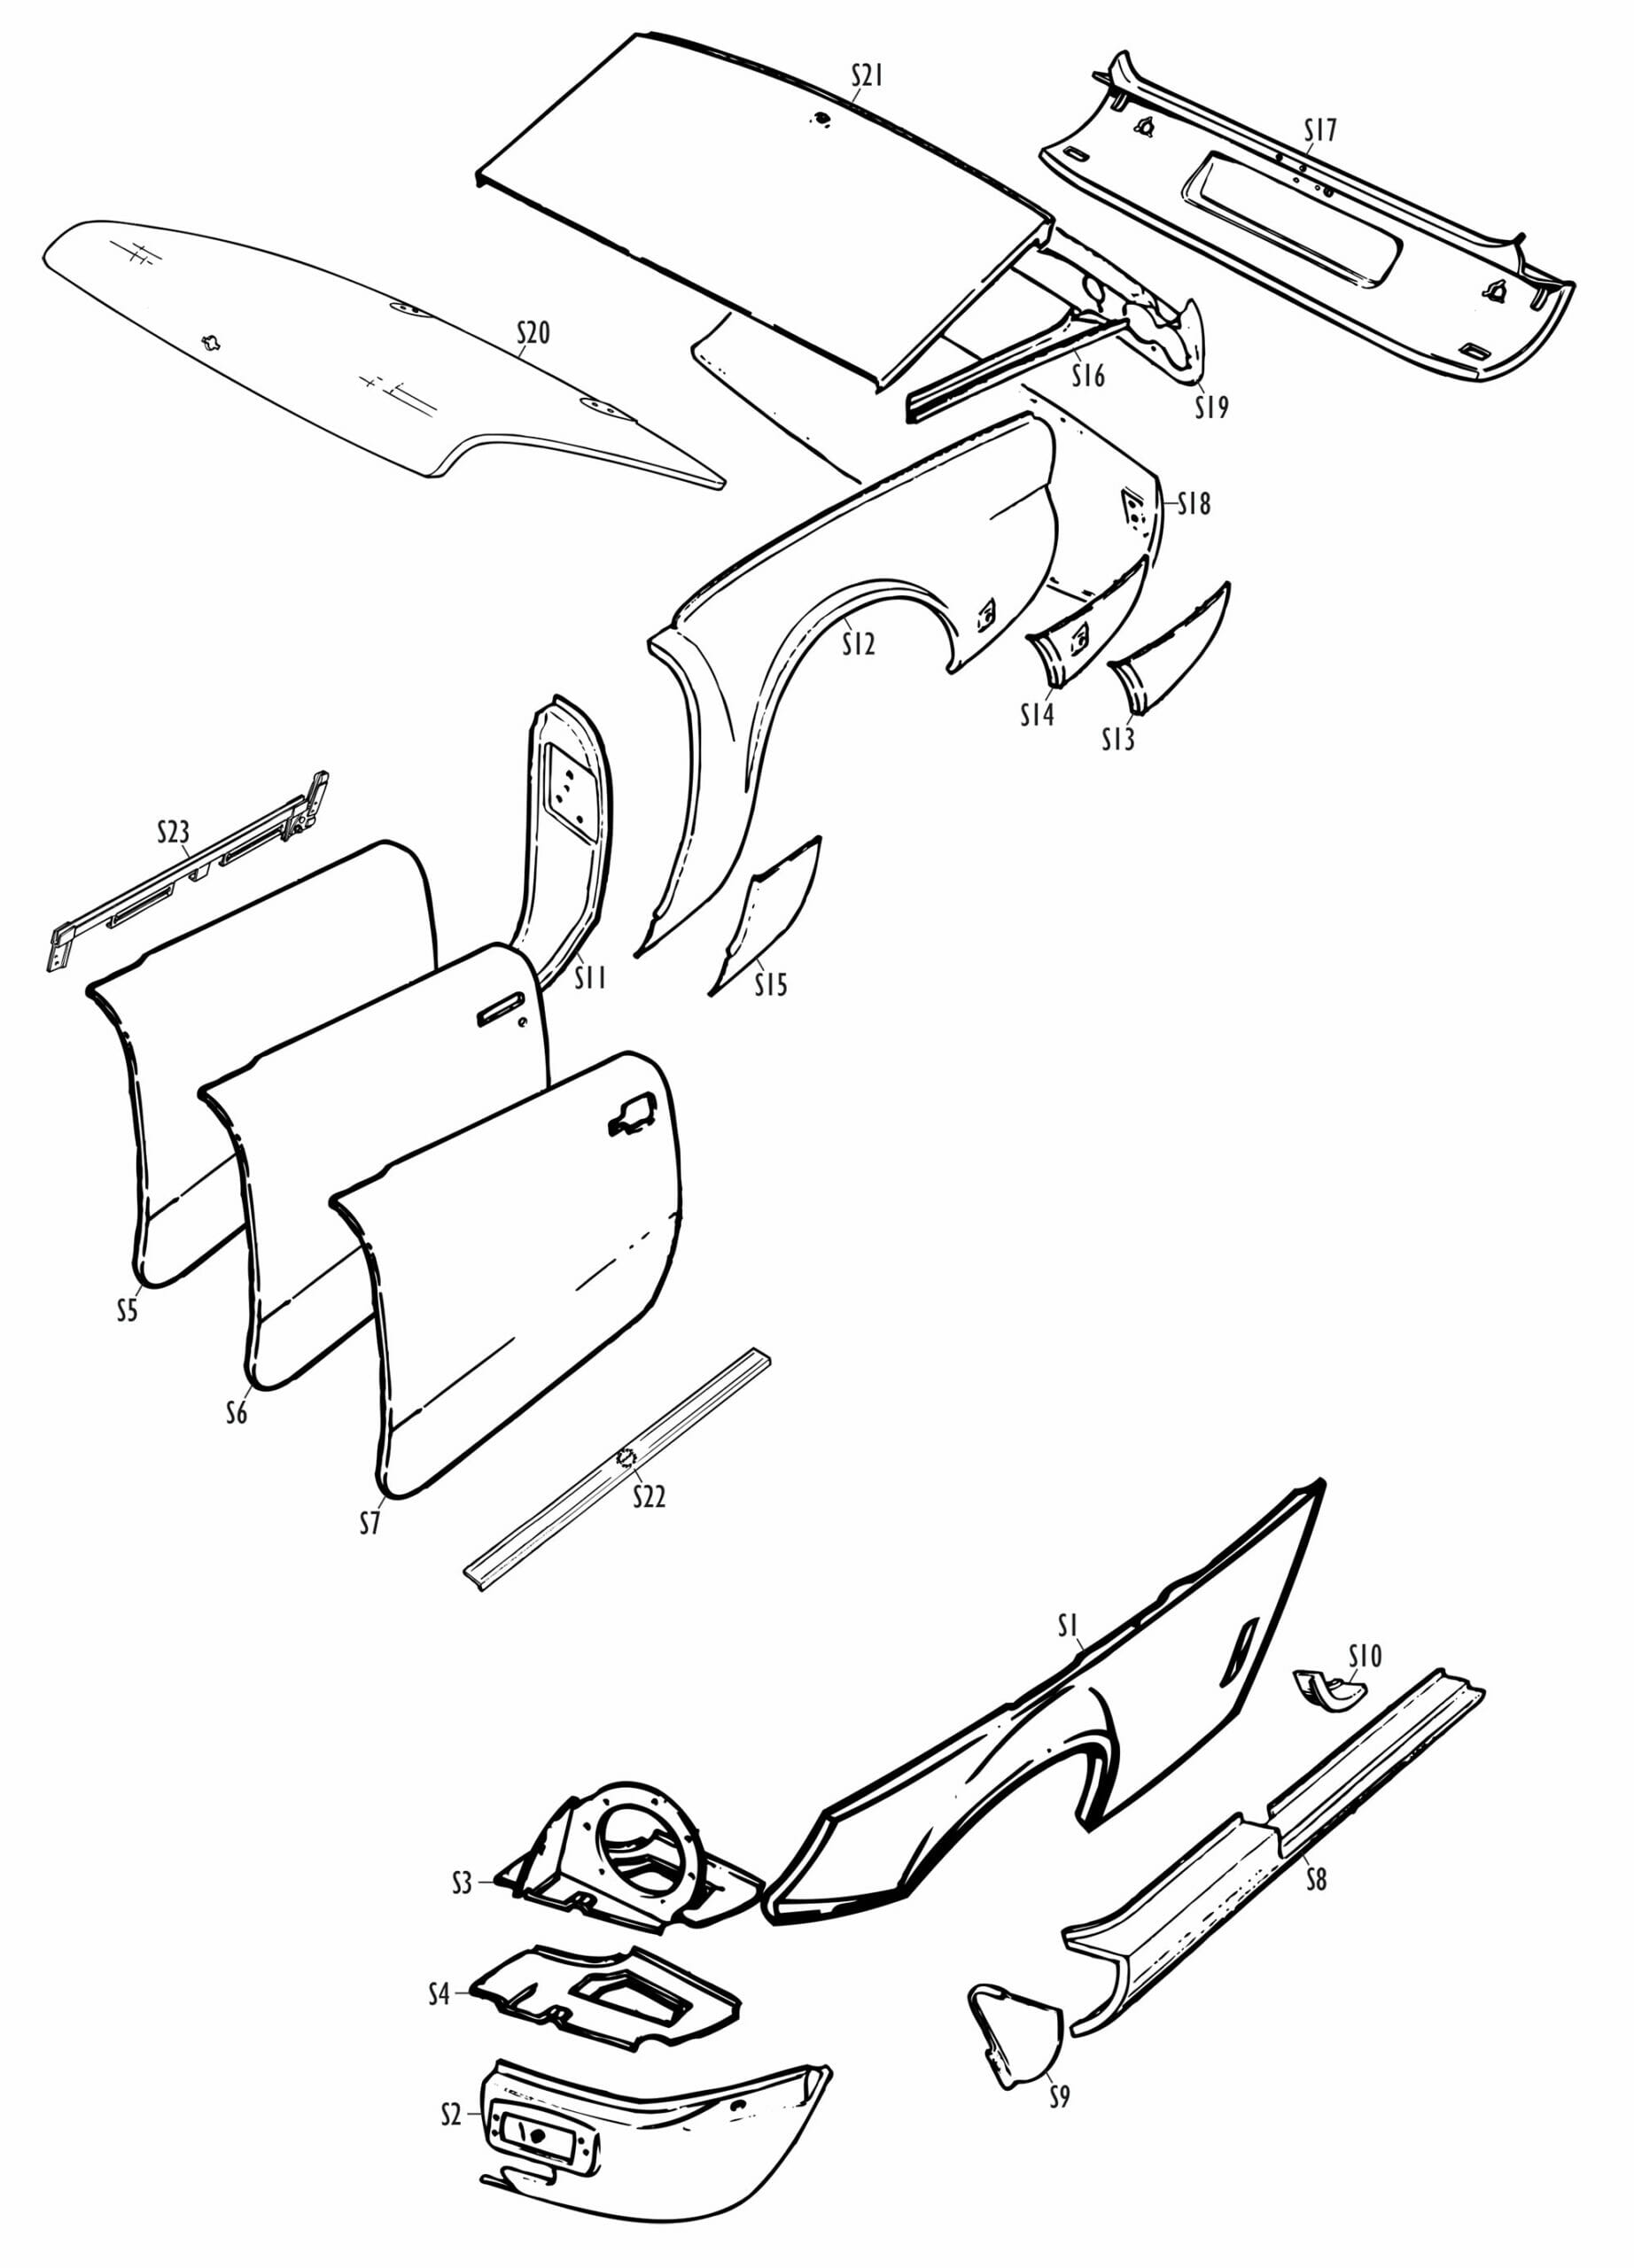 Steelcraft - Drawings Triumph Spitfire Outer panels